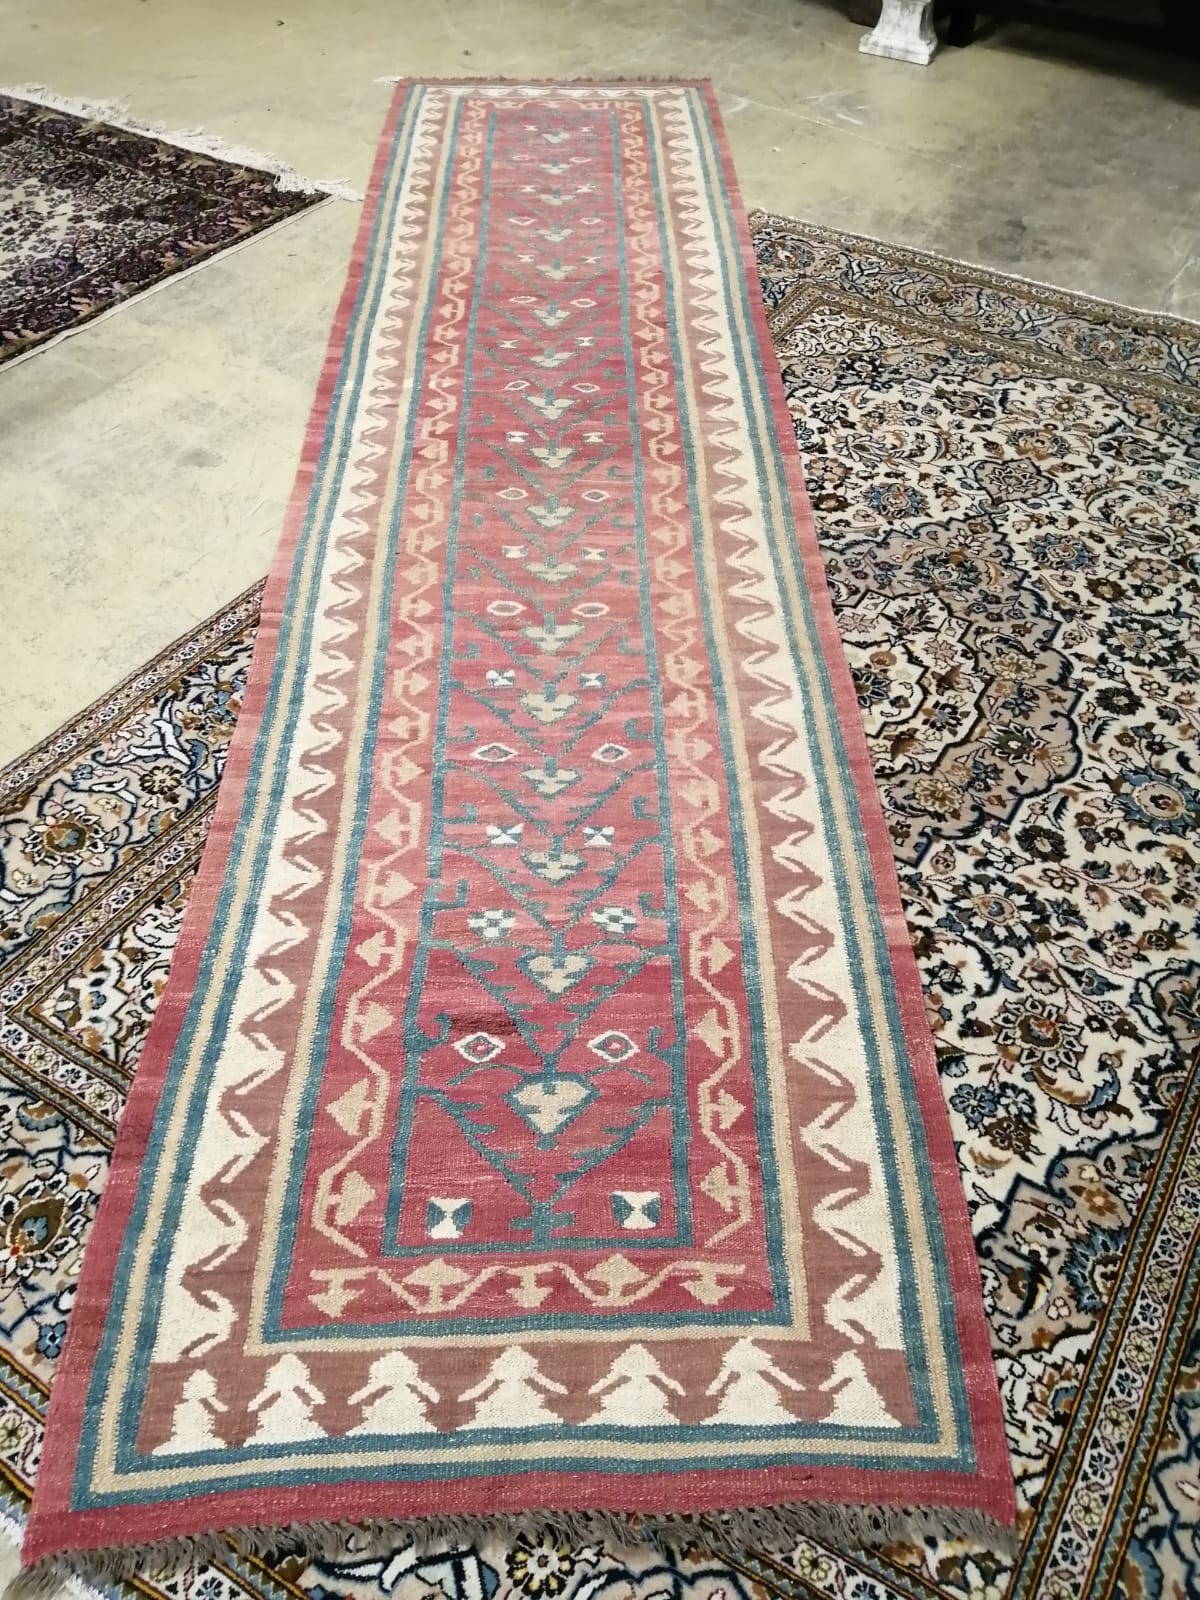 A Kilim runner with geometric motifs on a red ground, 394 x 96cm